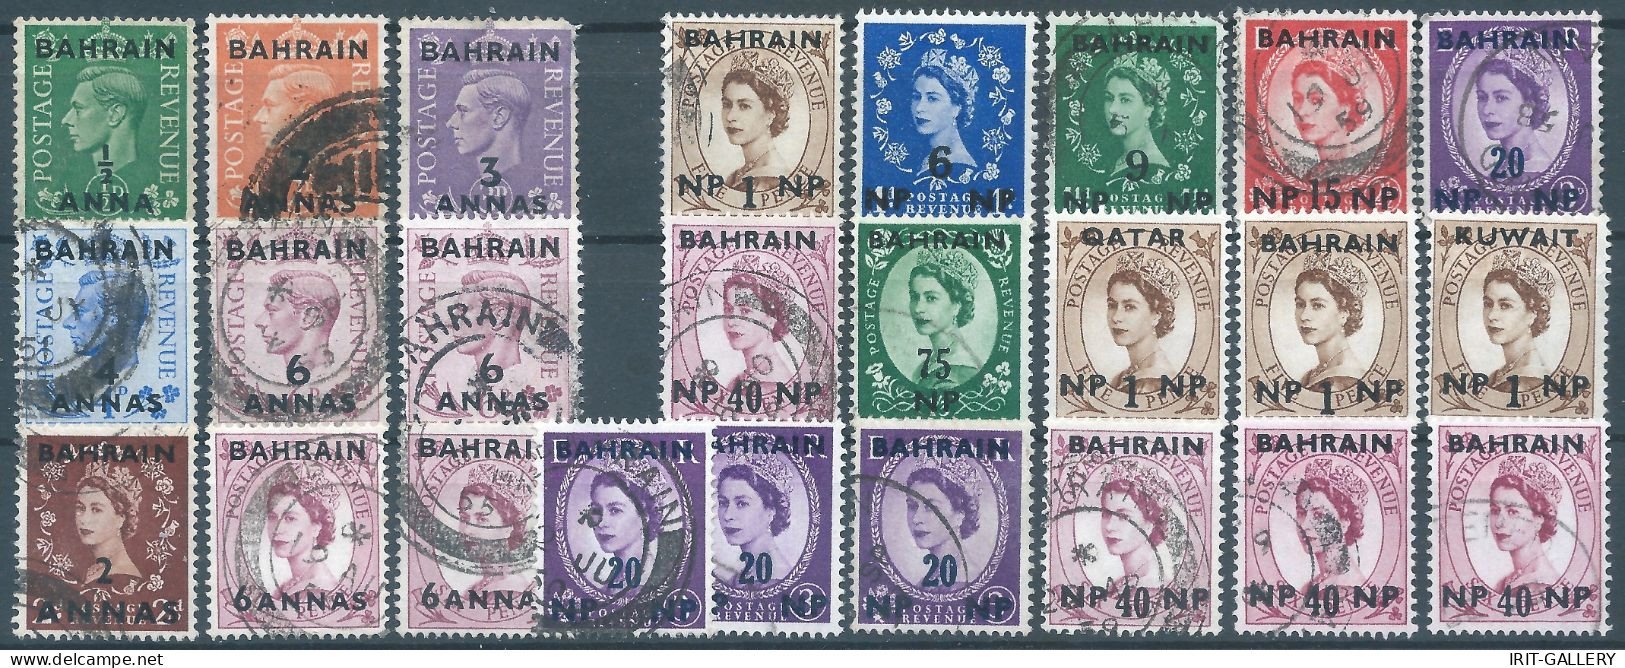 Bahrein,1948-1957 Great Britain Postage & Revenue Stamps Overprinted "BAHRIAN" Used,Mix - Bahrain (...-1965)